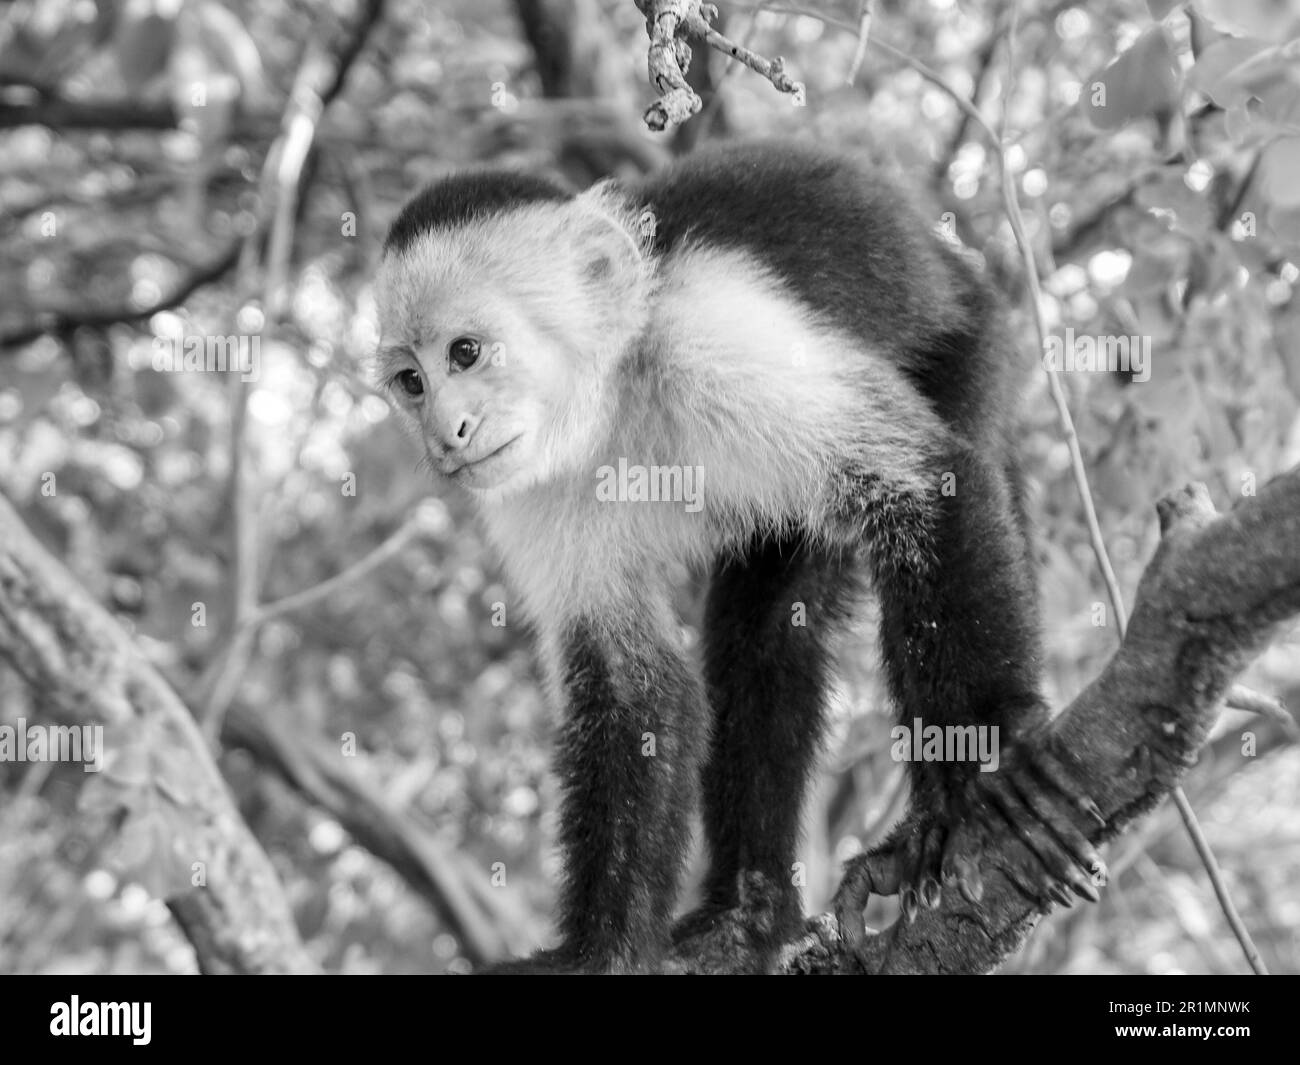 A Capuchin monkey sitting on a tree in the jungle in grayscale Stock Photo